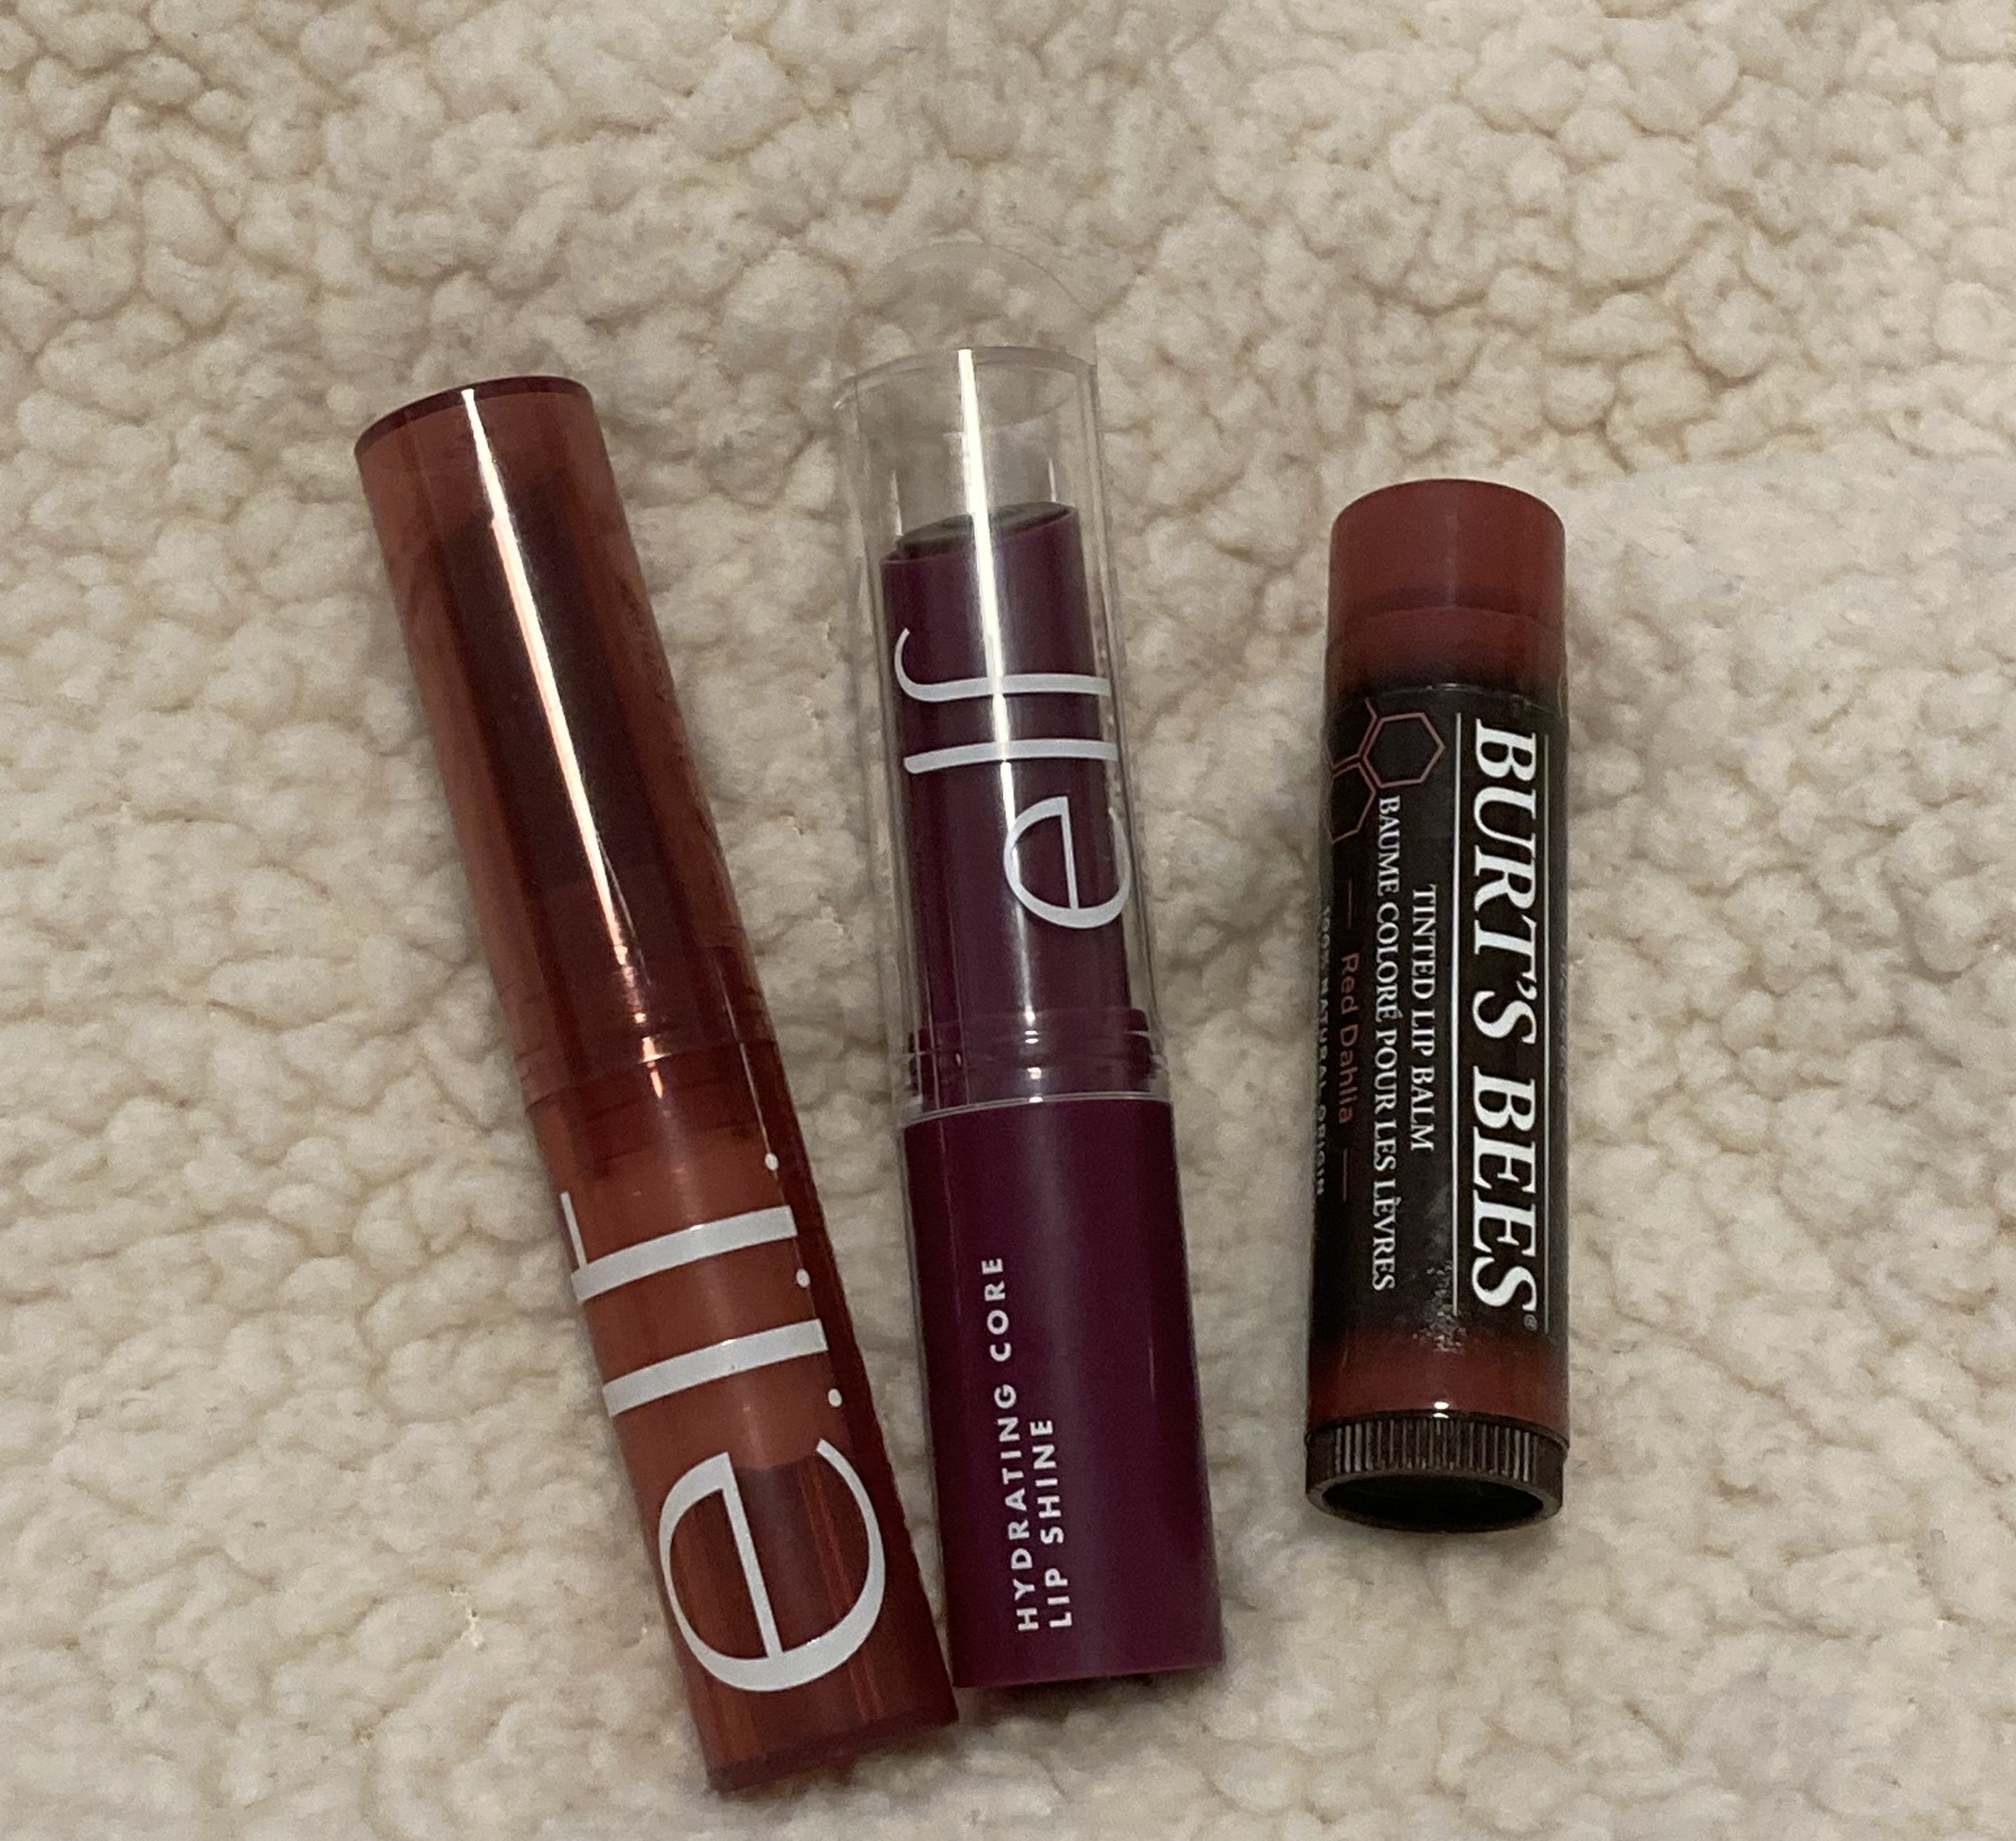 Dupe Lip Products For Clinique's Black Honey Balm